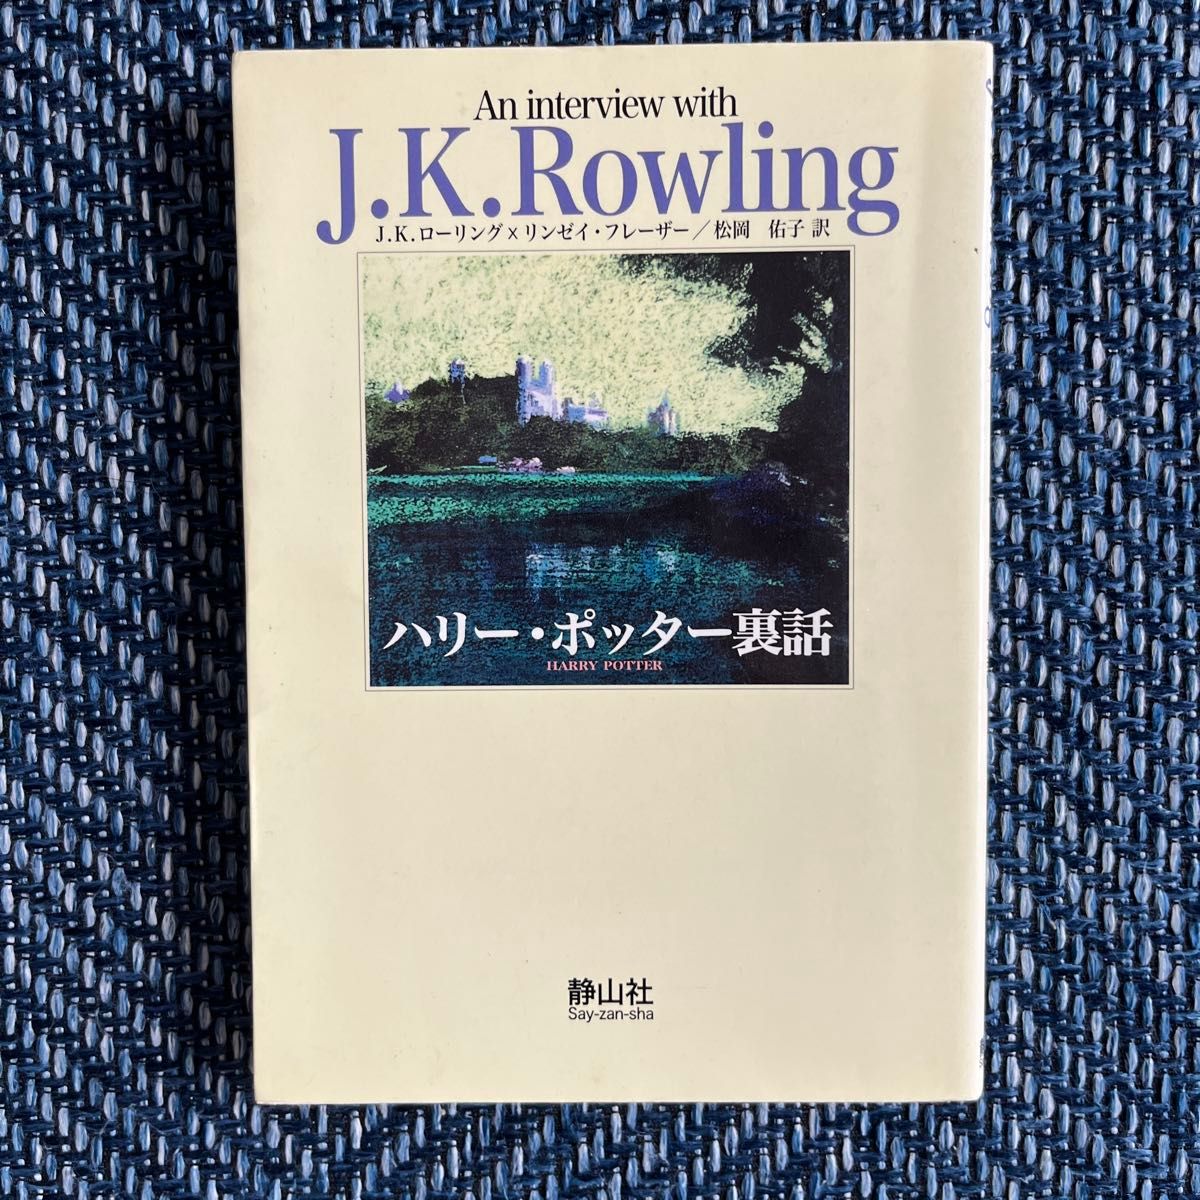 An interview with J.K.Rowling ハリー・ポッター裏話